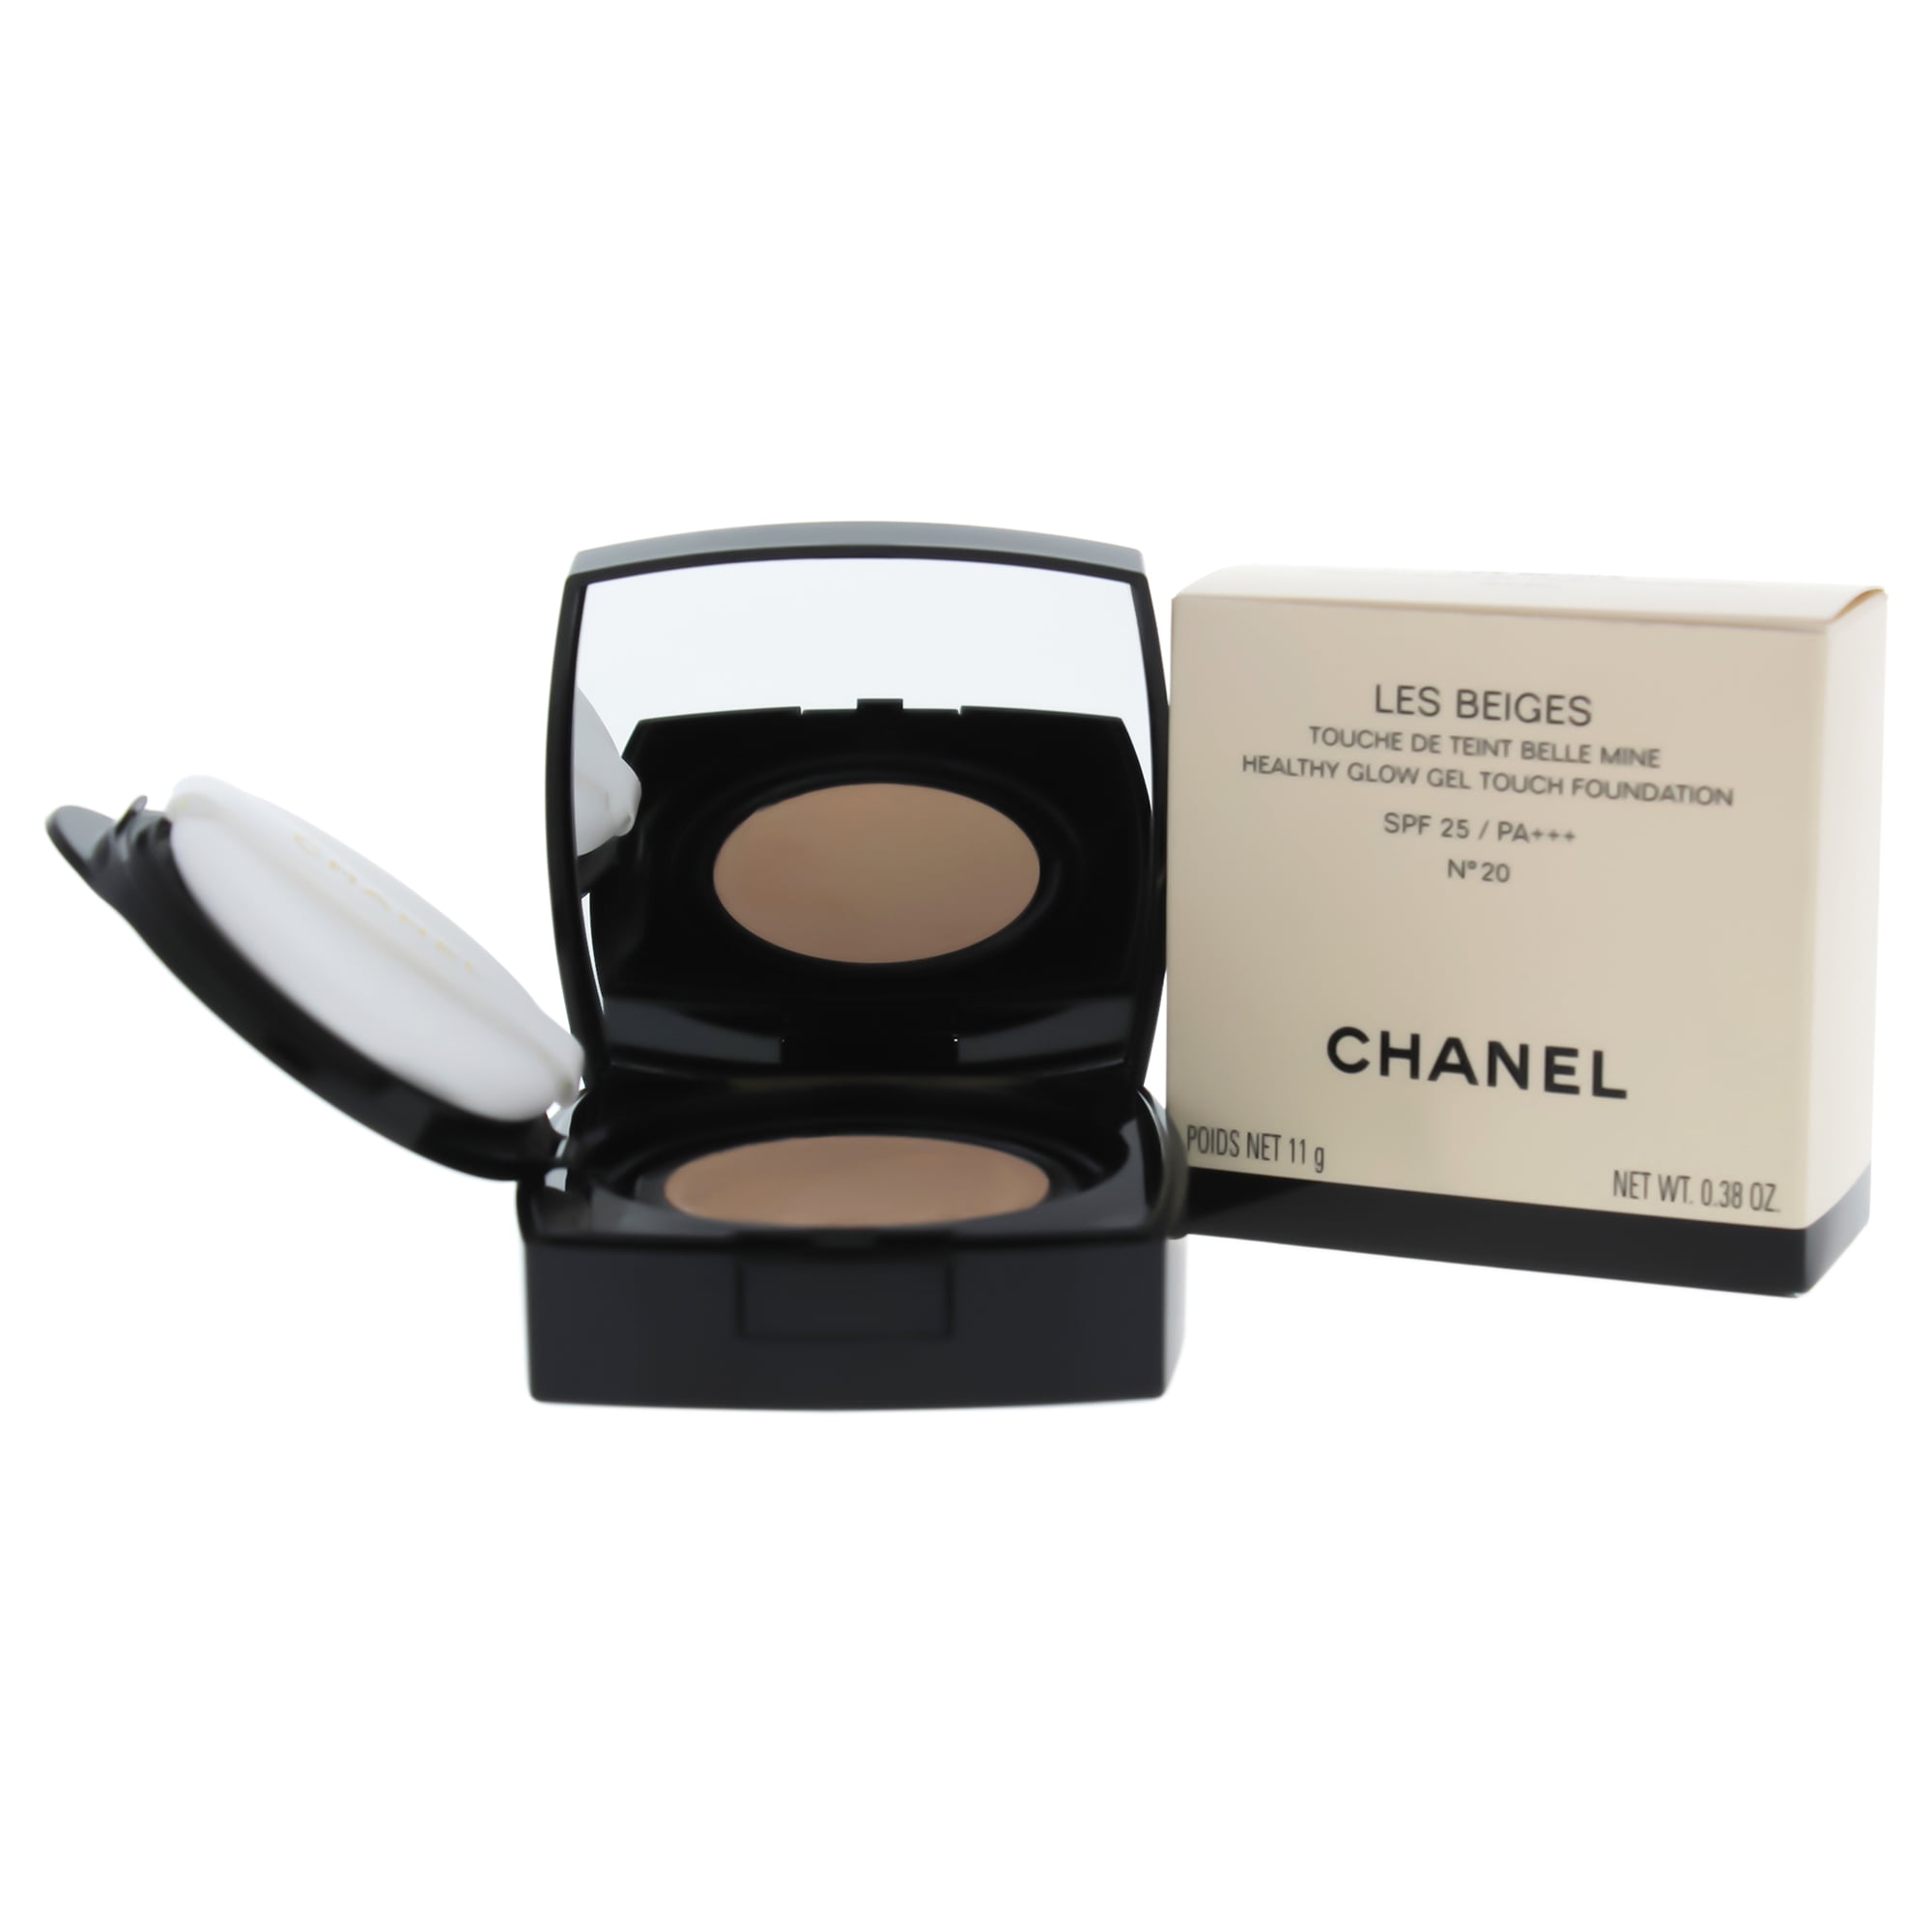 Les Beiges Healthy Glow Gel Touch Foundation SPF 25 - 20 by Chanel for  Women - 0.38 oz Foundation